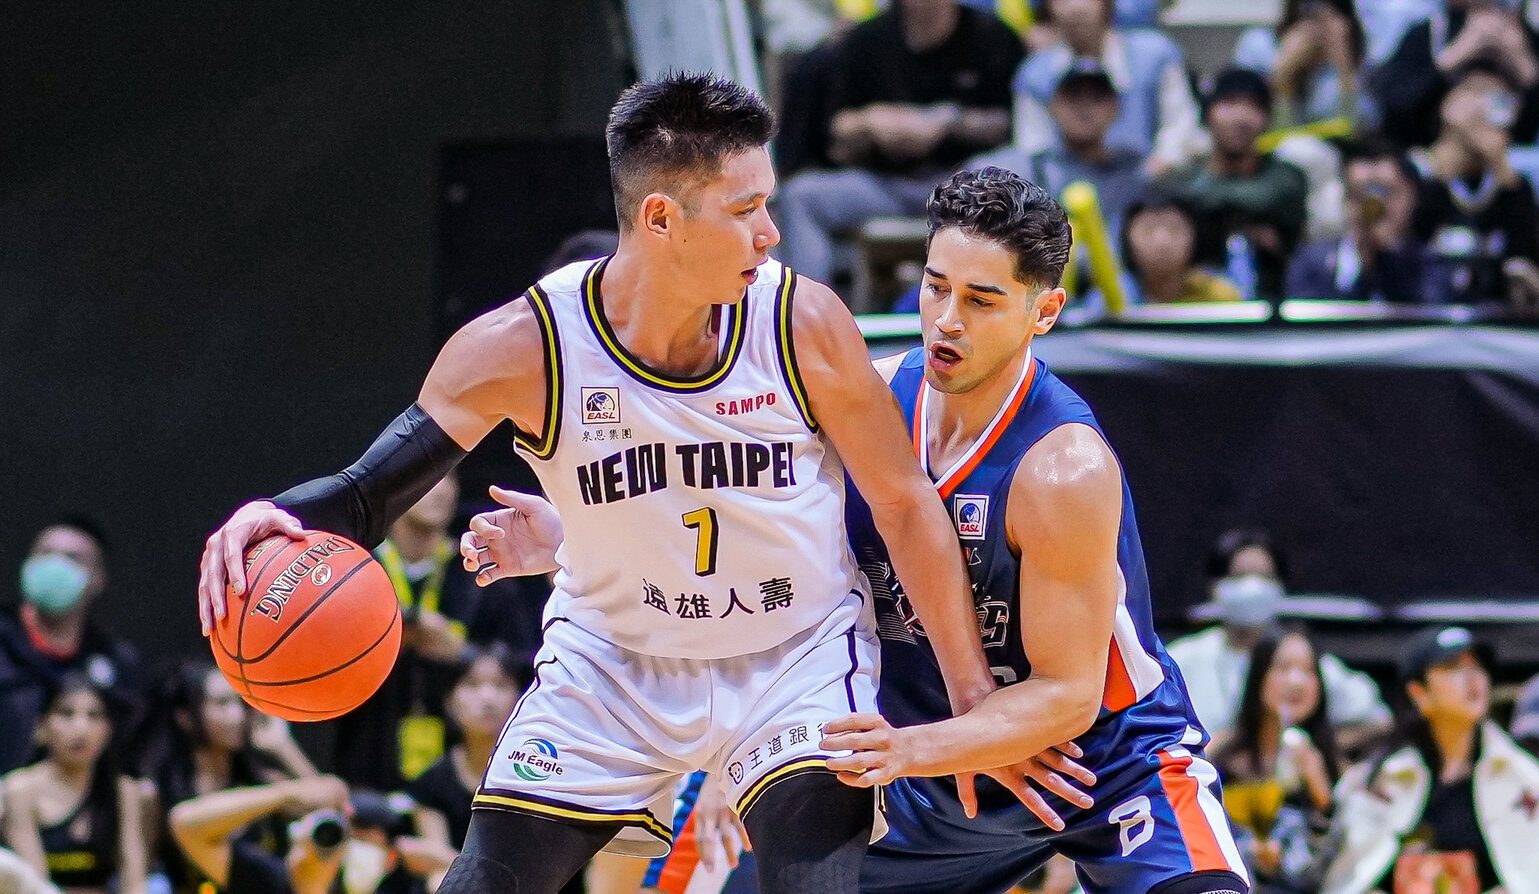 Jeremy Lin lifts New Taipei past Meralco in EASL